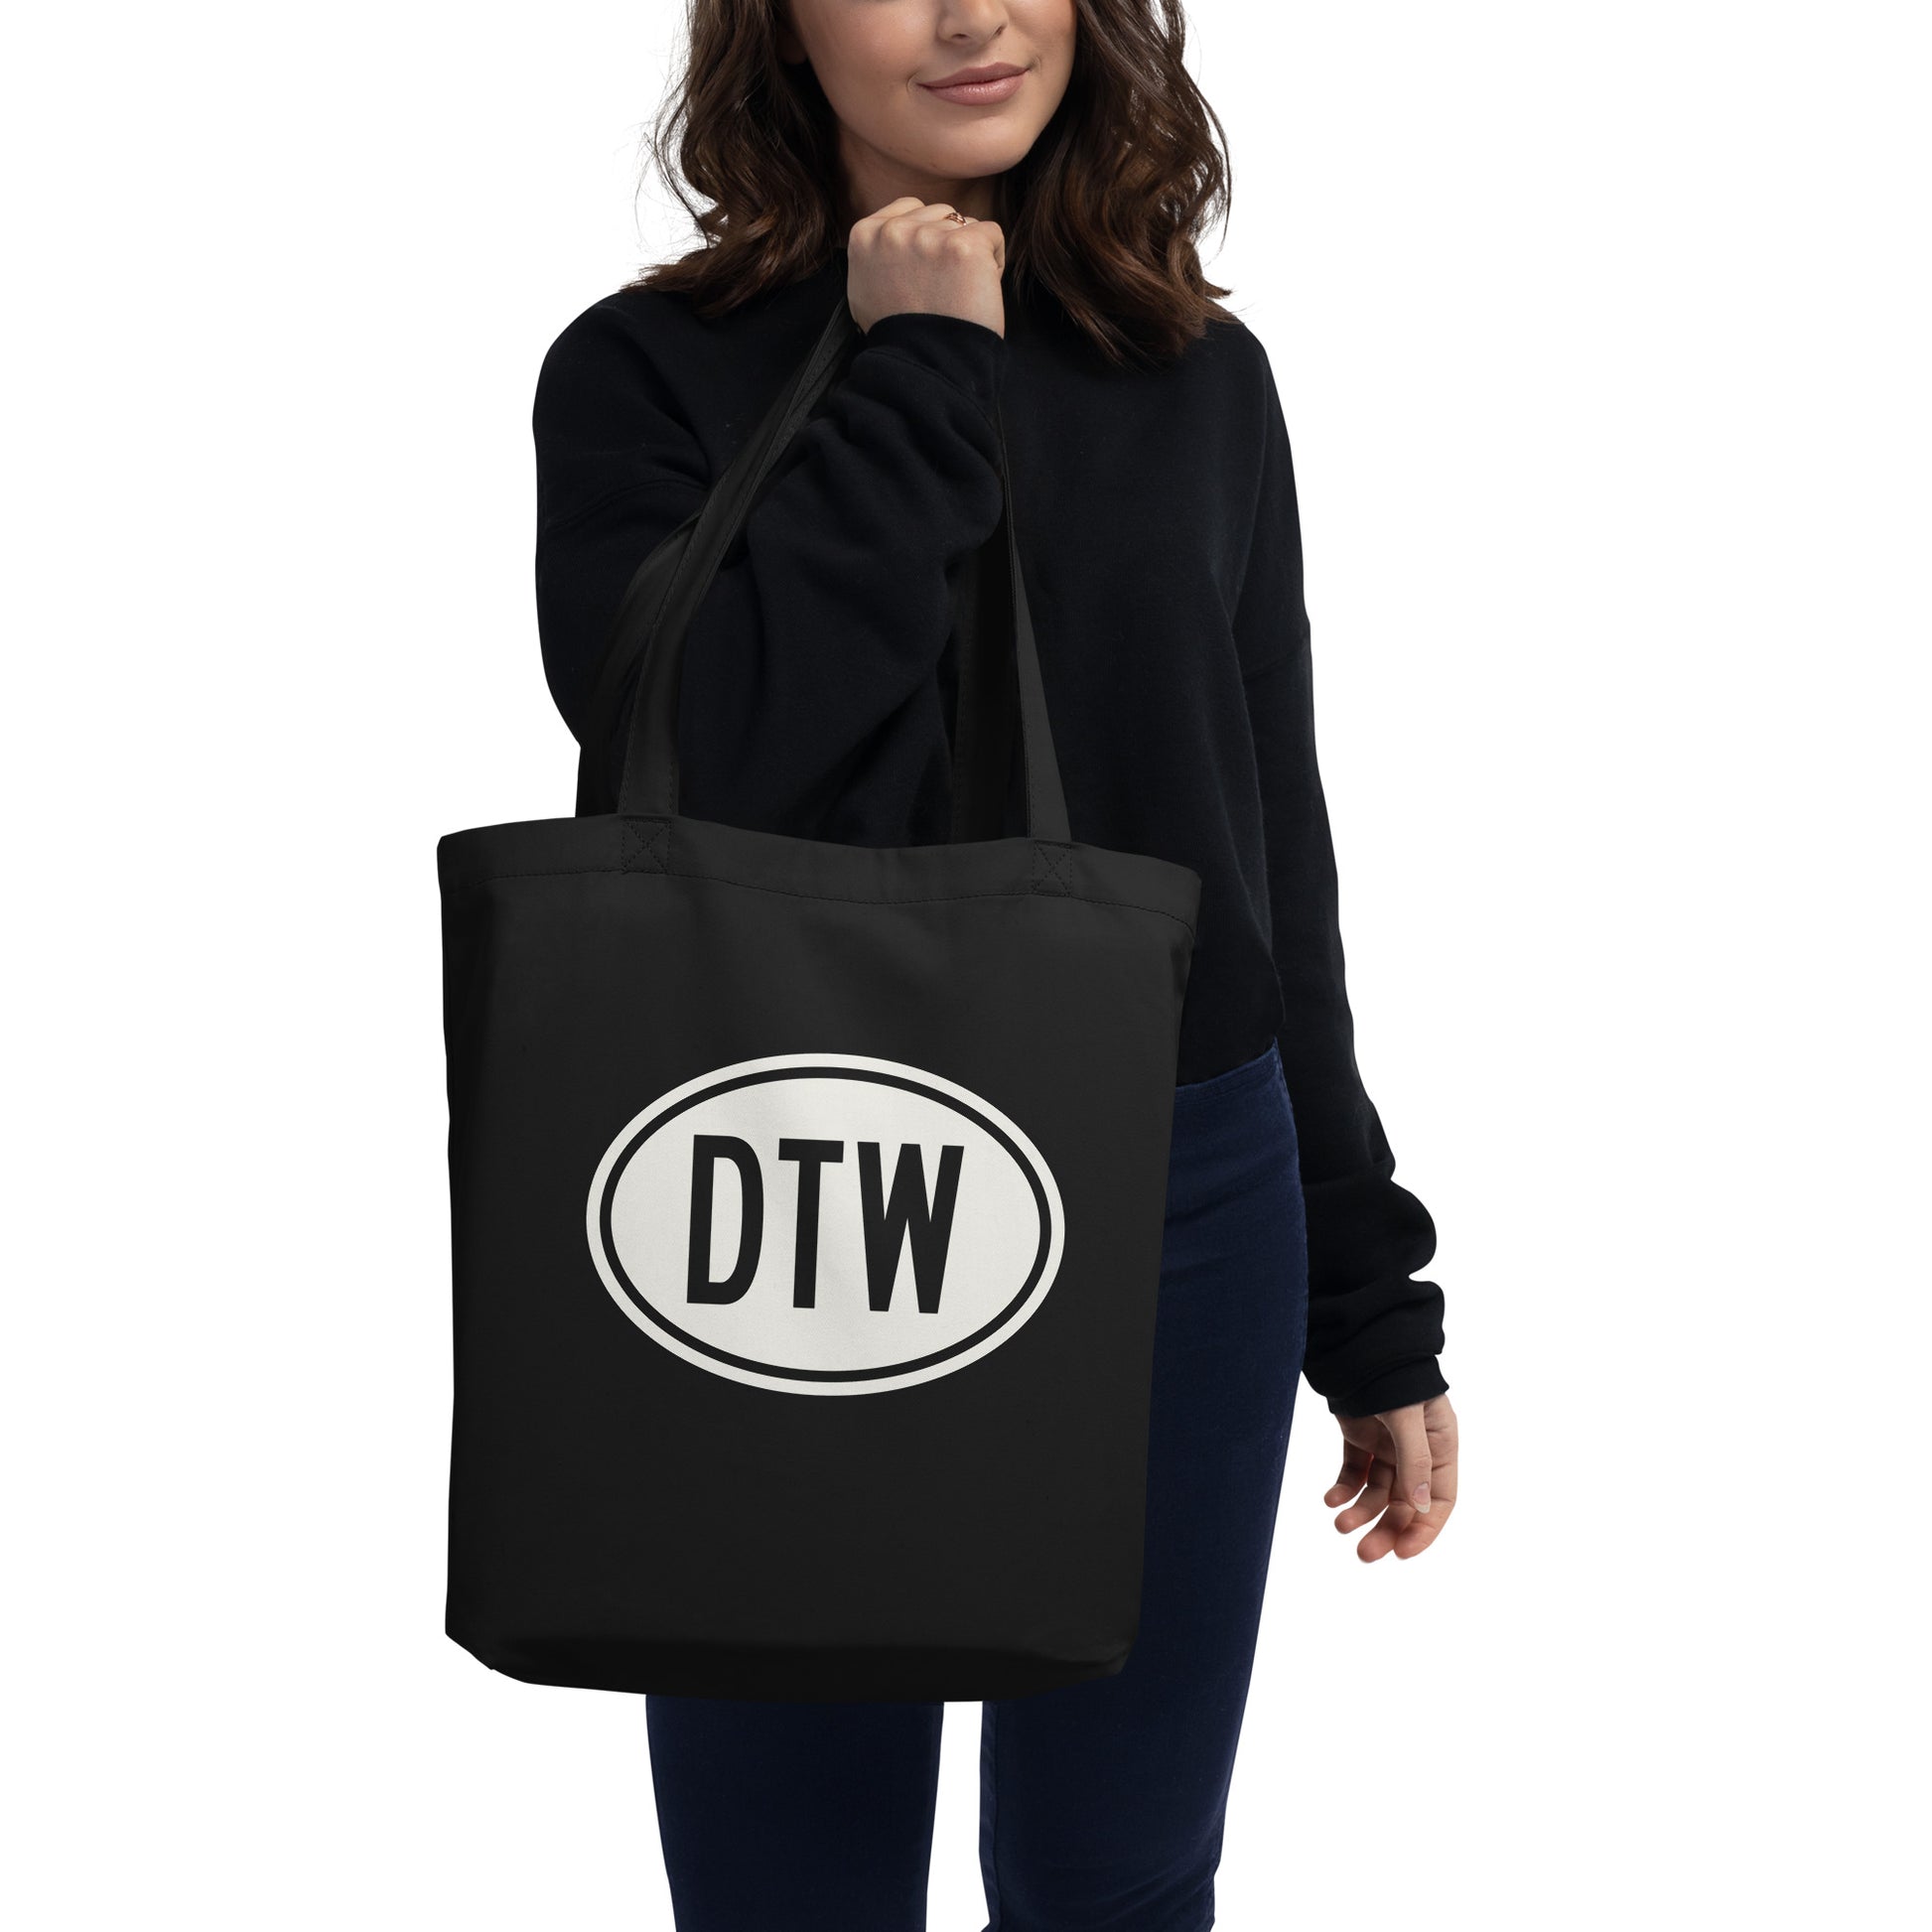 Unique Travel Gift Organic Tote - White Oval • DTW Detroit • YHM Designs - Image 03